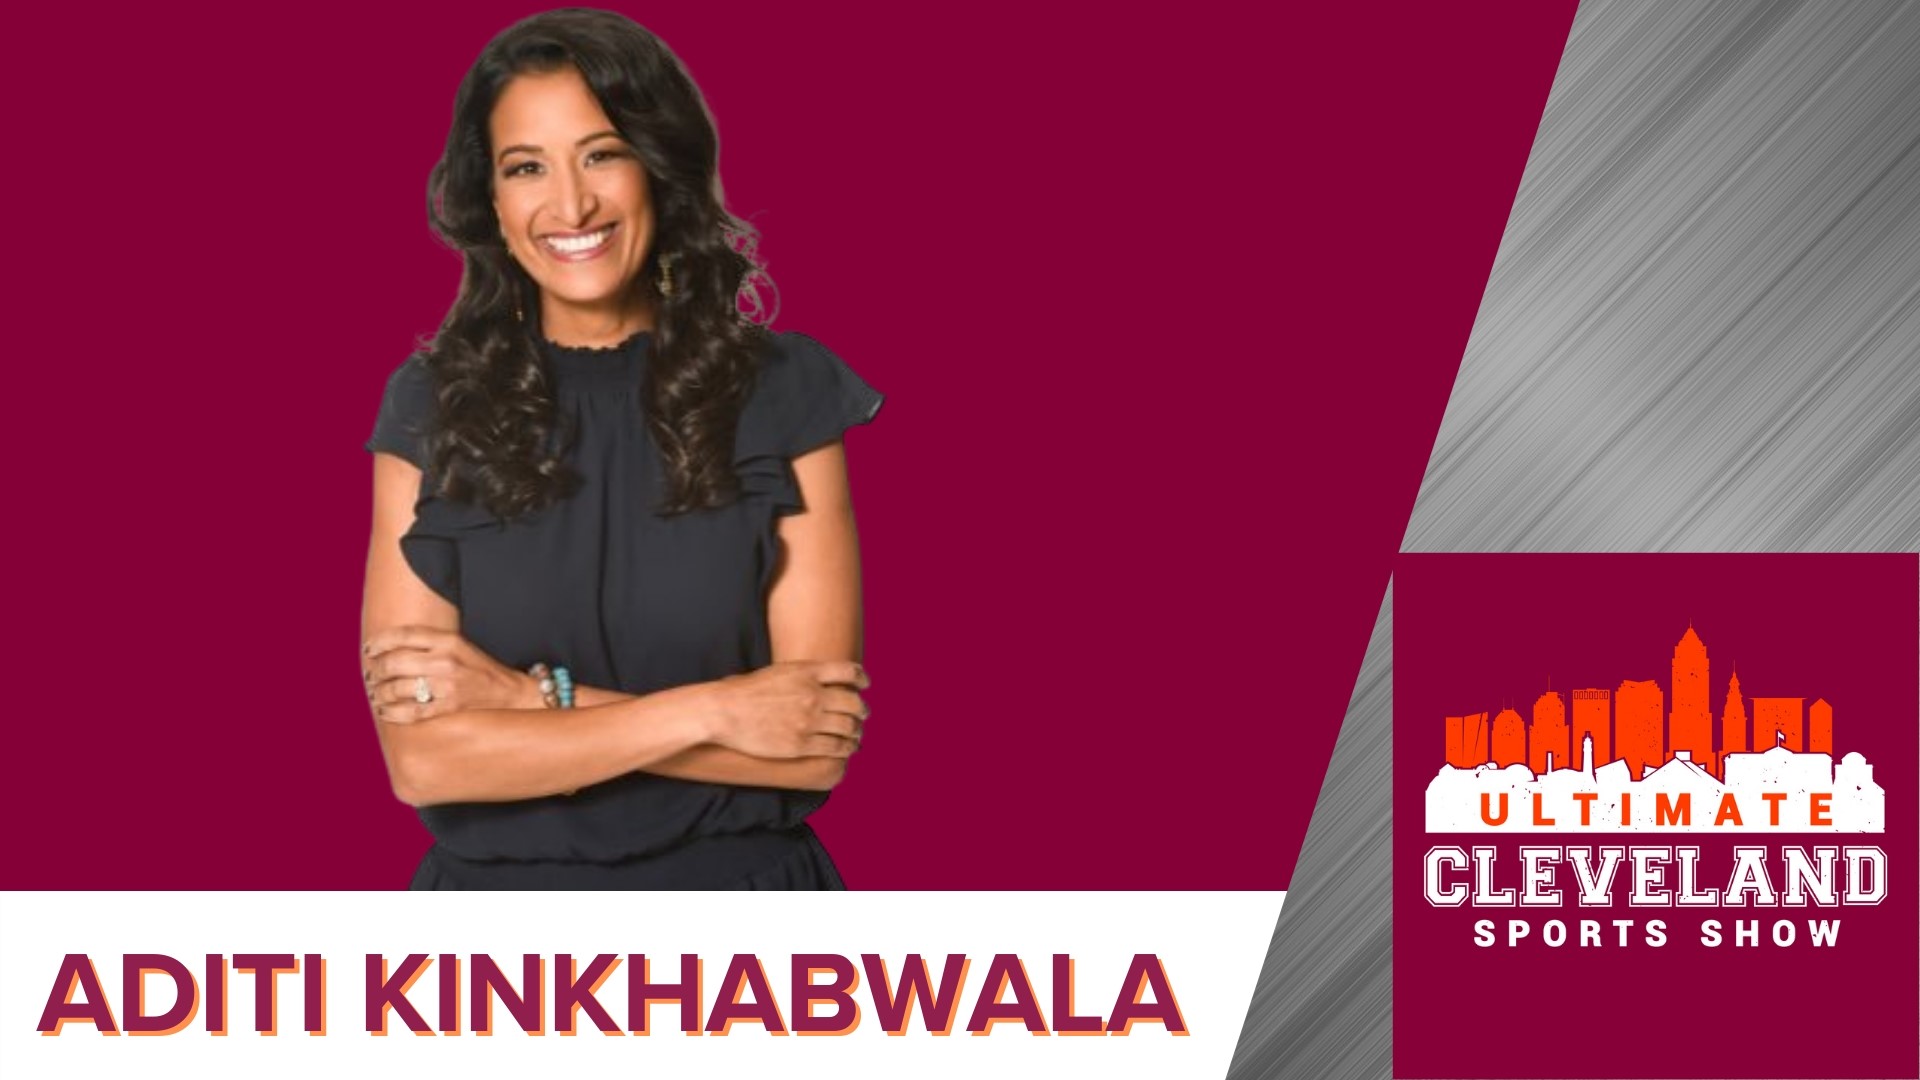 Former NFL reporter Aditi Kinkhabwala gives UCSS her expertise on Deshaun Watson, Baker Mayfield, Brown's schedule, AFC North QBs, and Jarvis Landry.